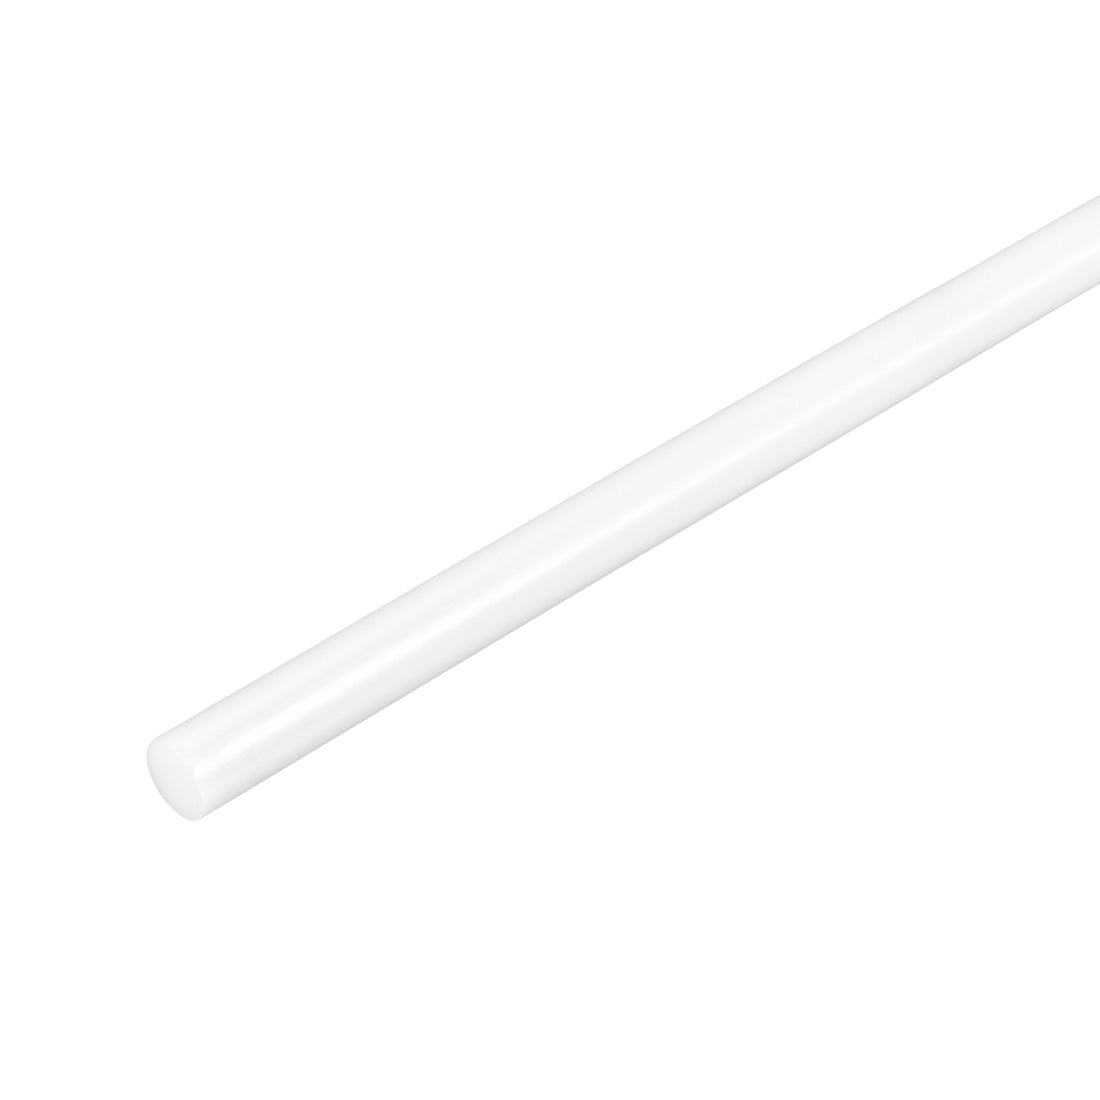 uxcell Uxcell Plastic Round Rod,4mm Dia 50cm White Engineering Plastic Round Bar